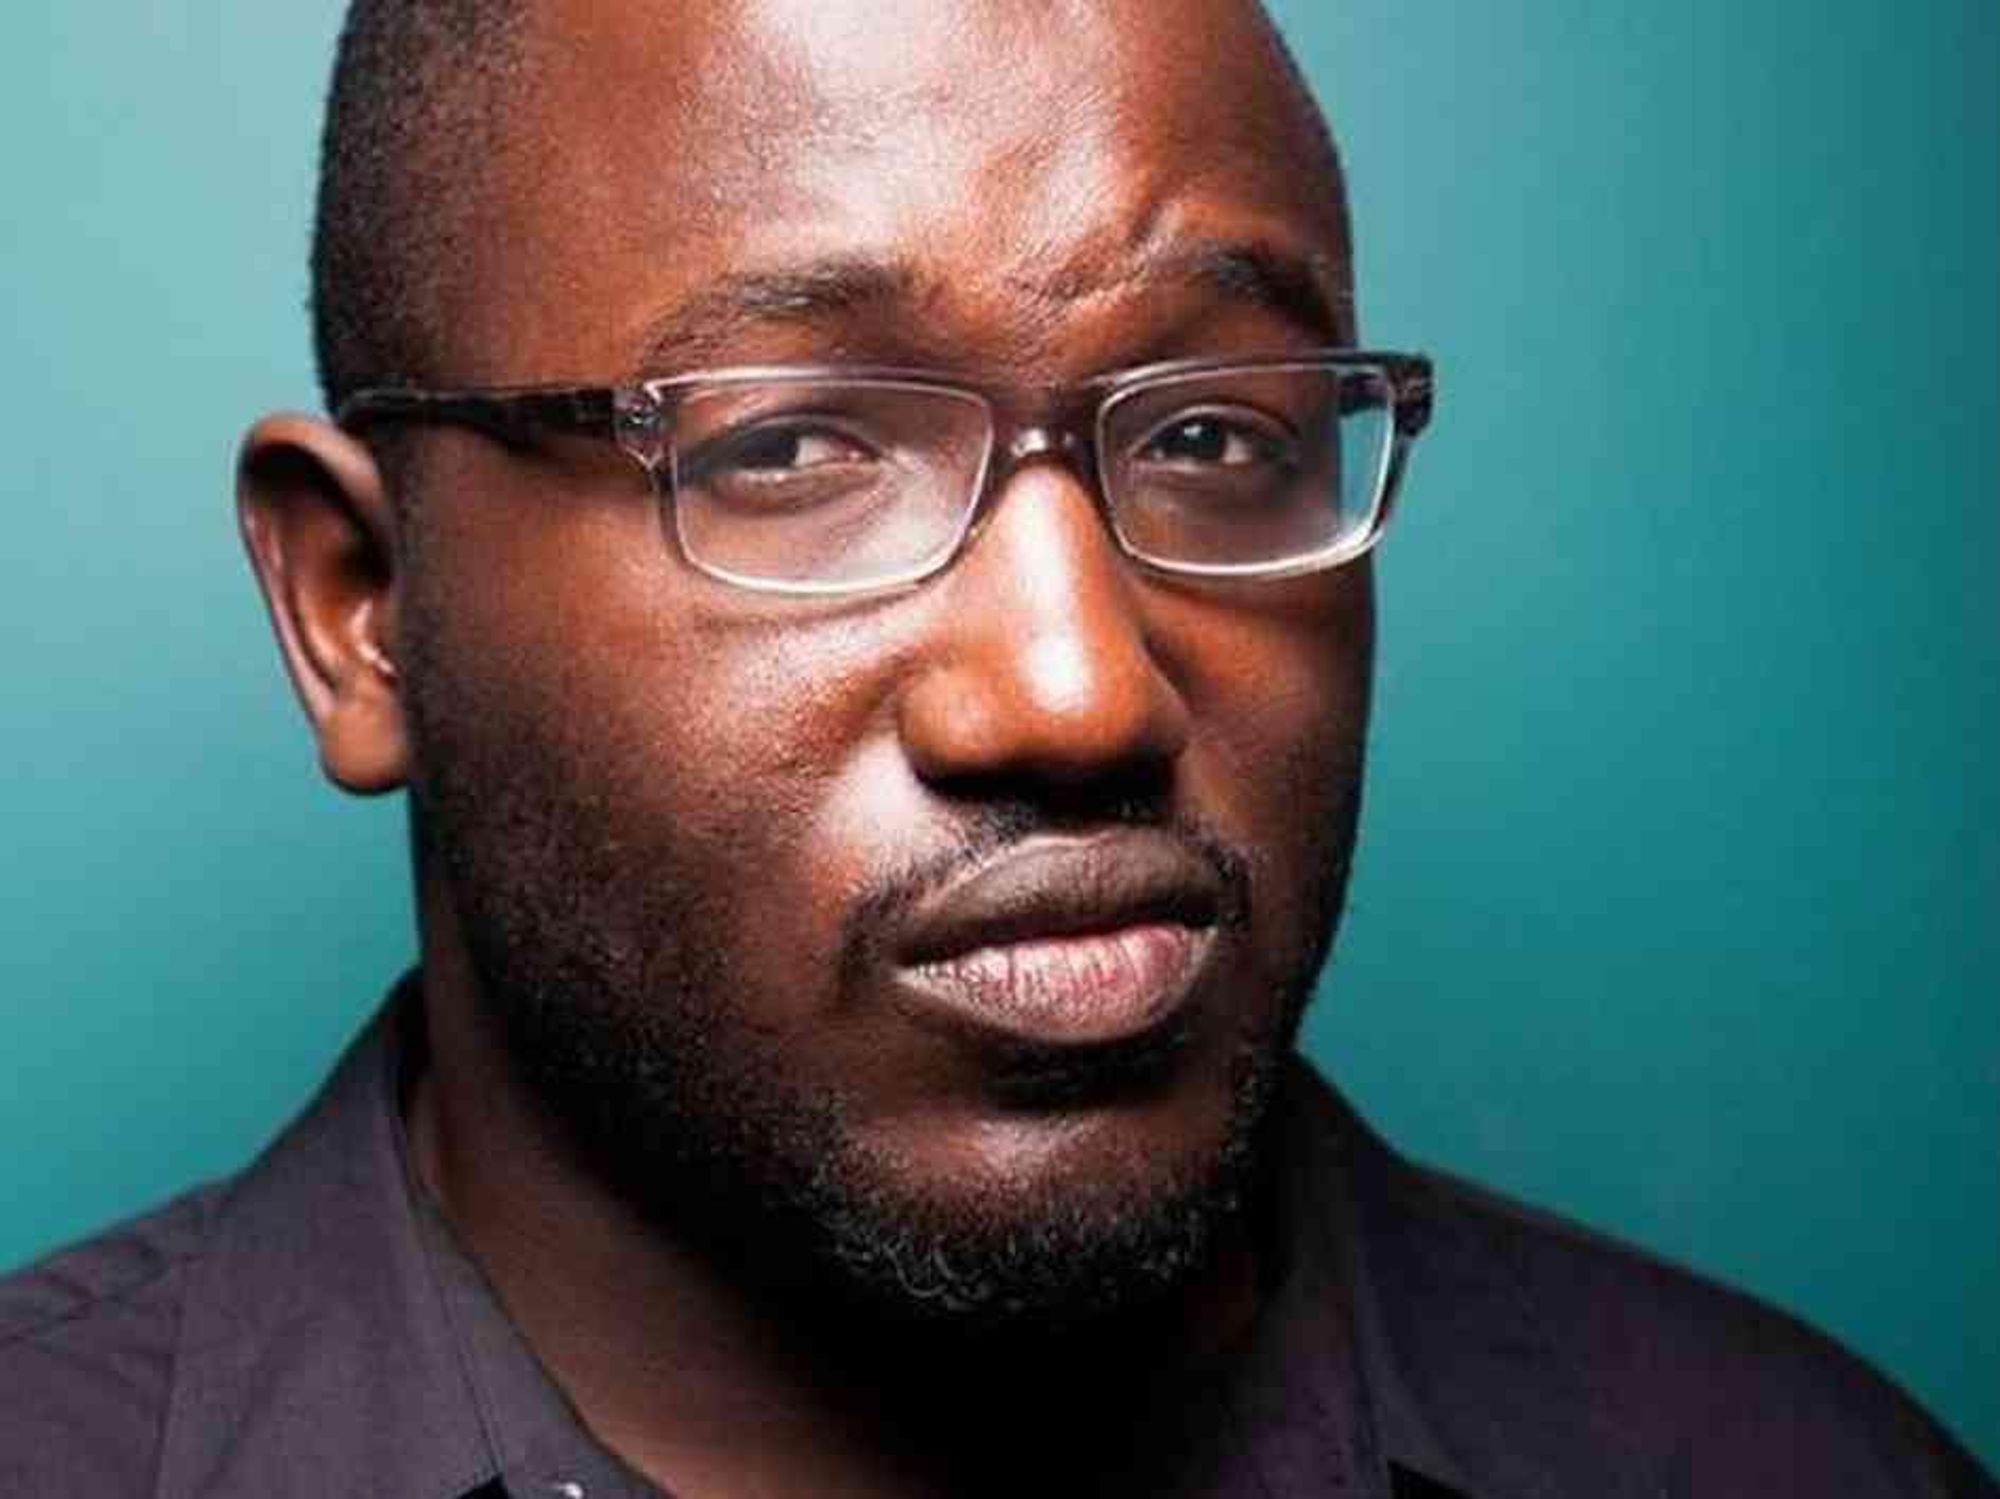 Hannibal Buress will be one of the festival's primary headliners.